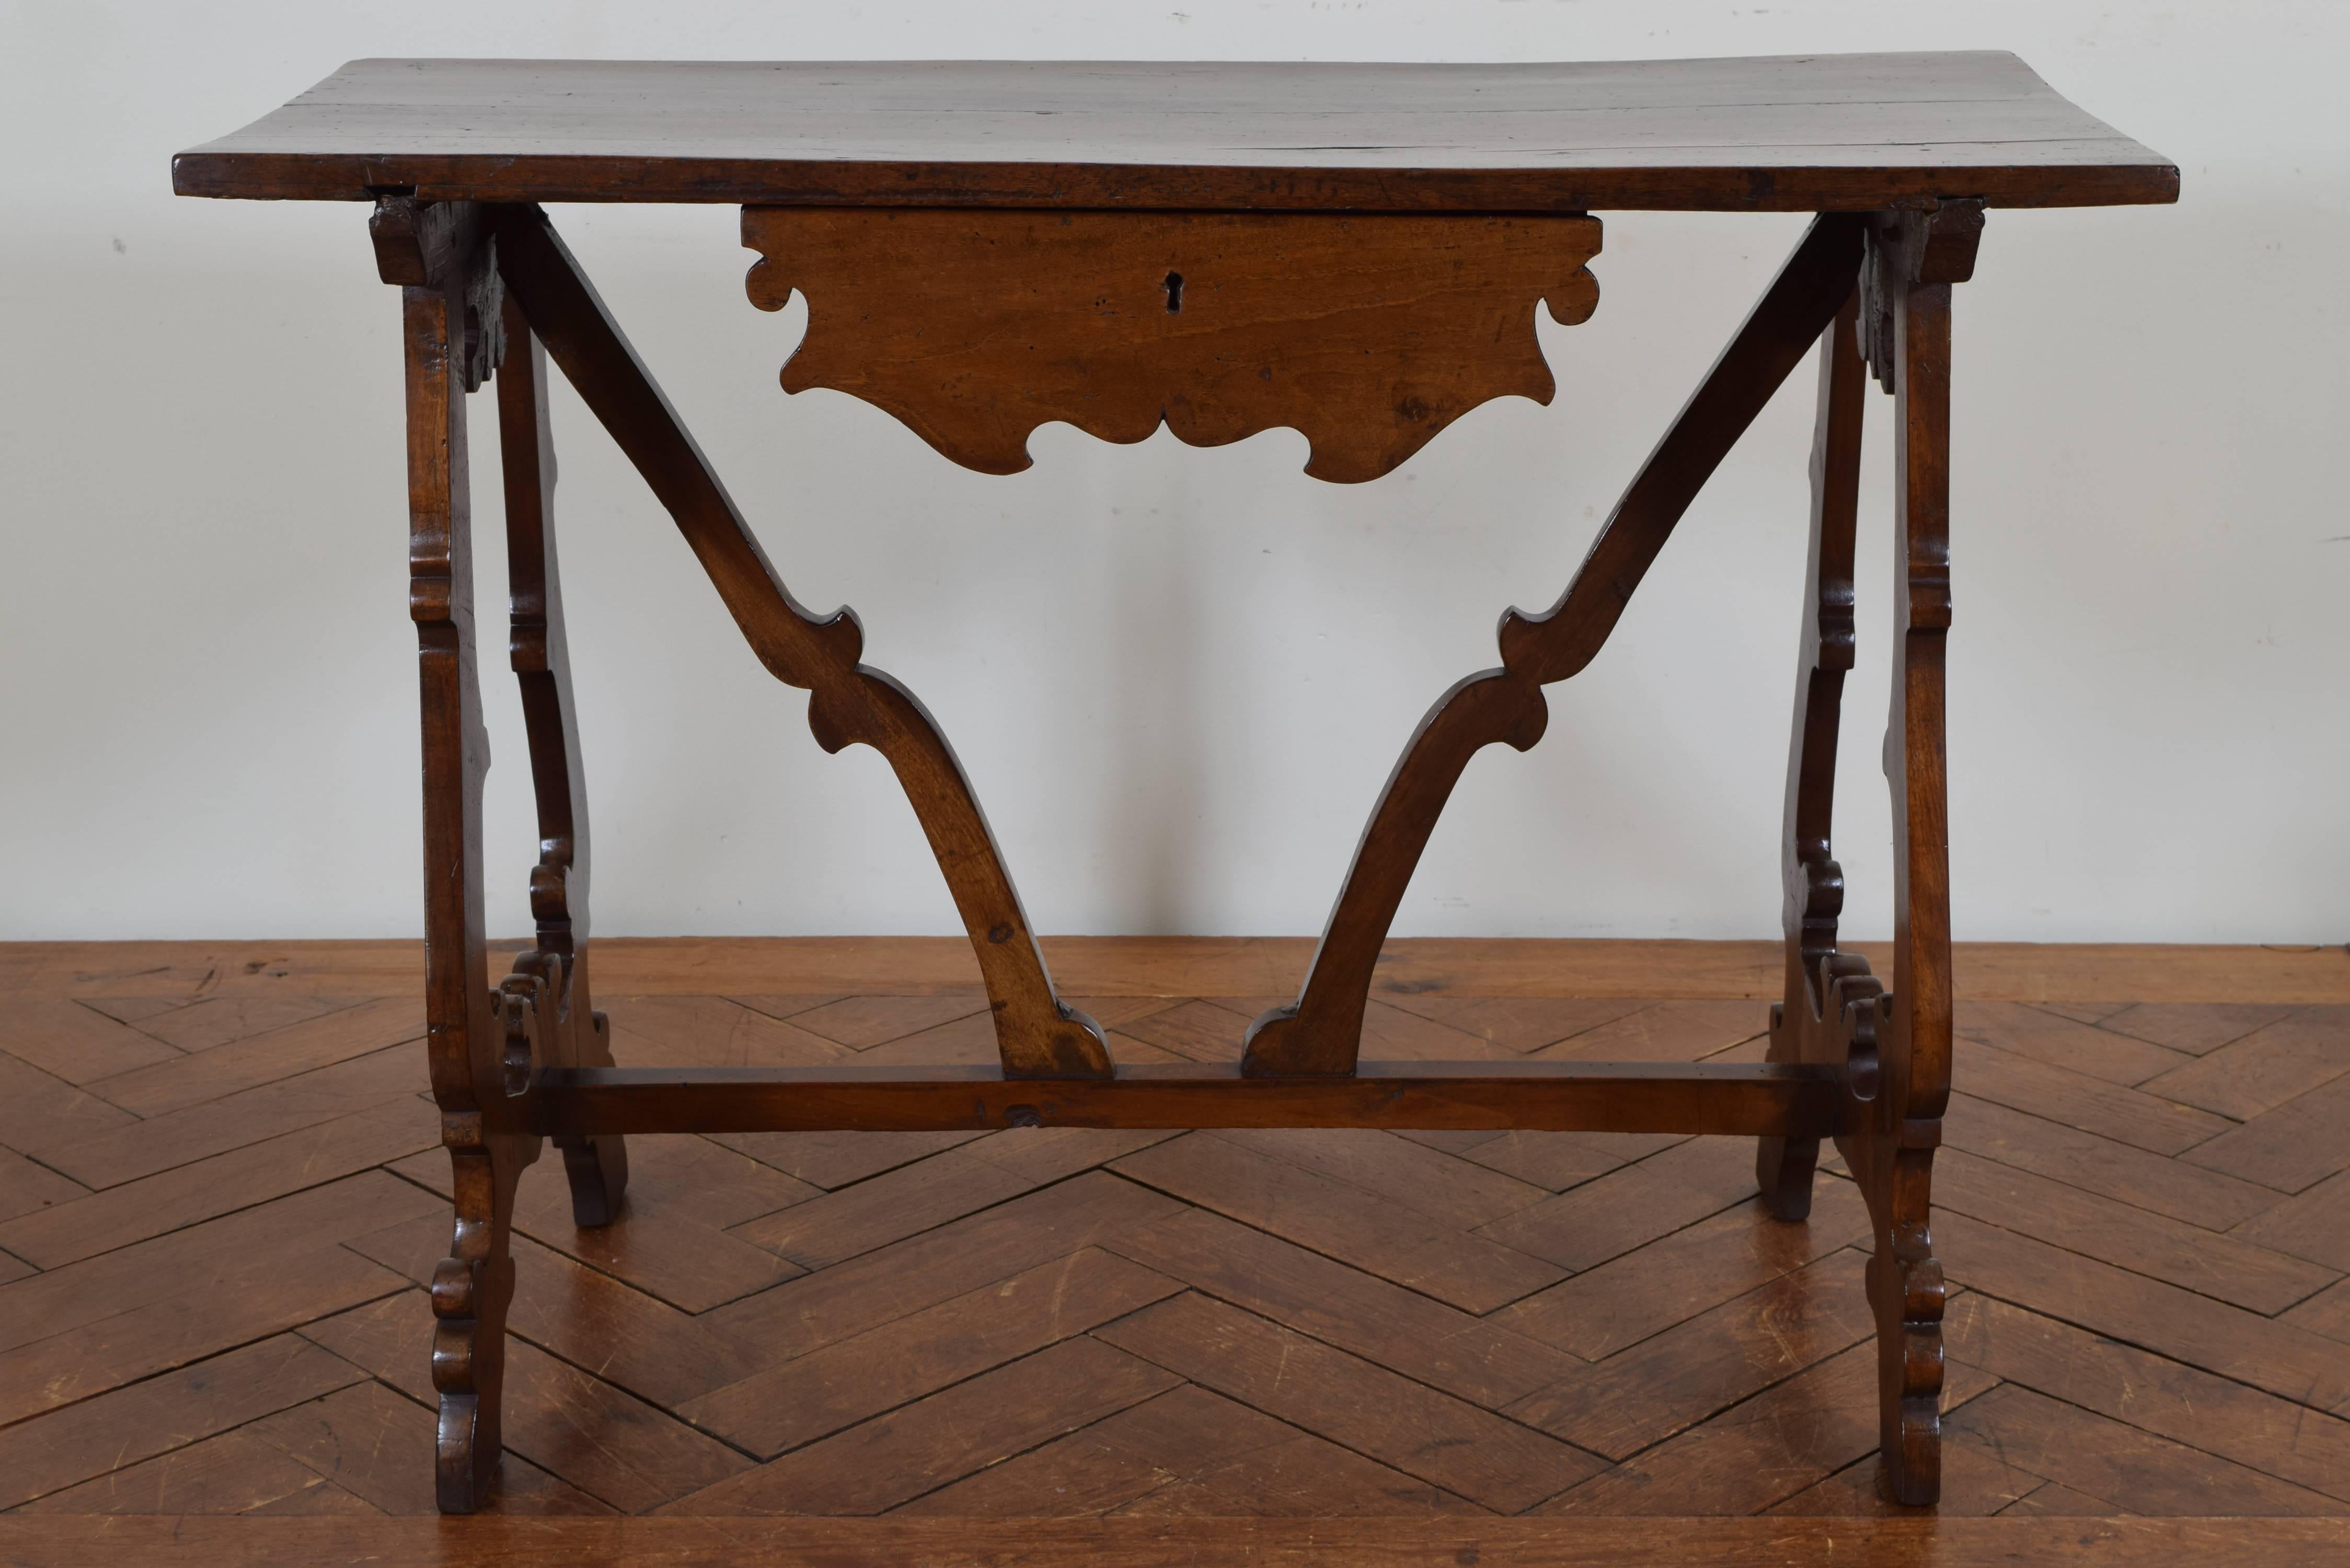 The rectangular top supporting one-drawer and side decorative carvings, raised on shaped lyre-form legs joined by three stretchers, late 17th century.